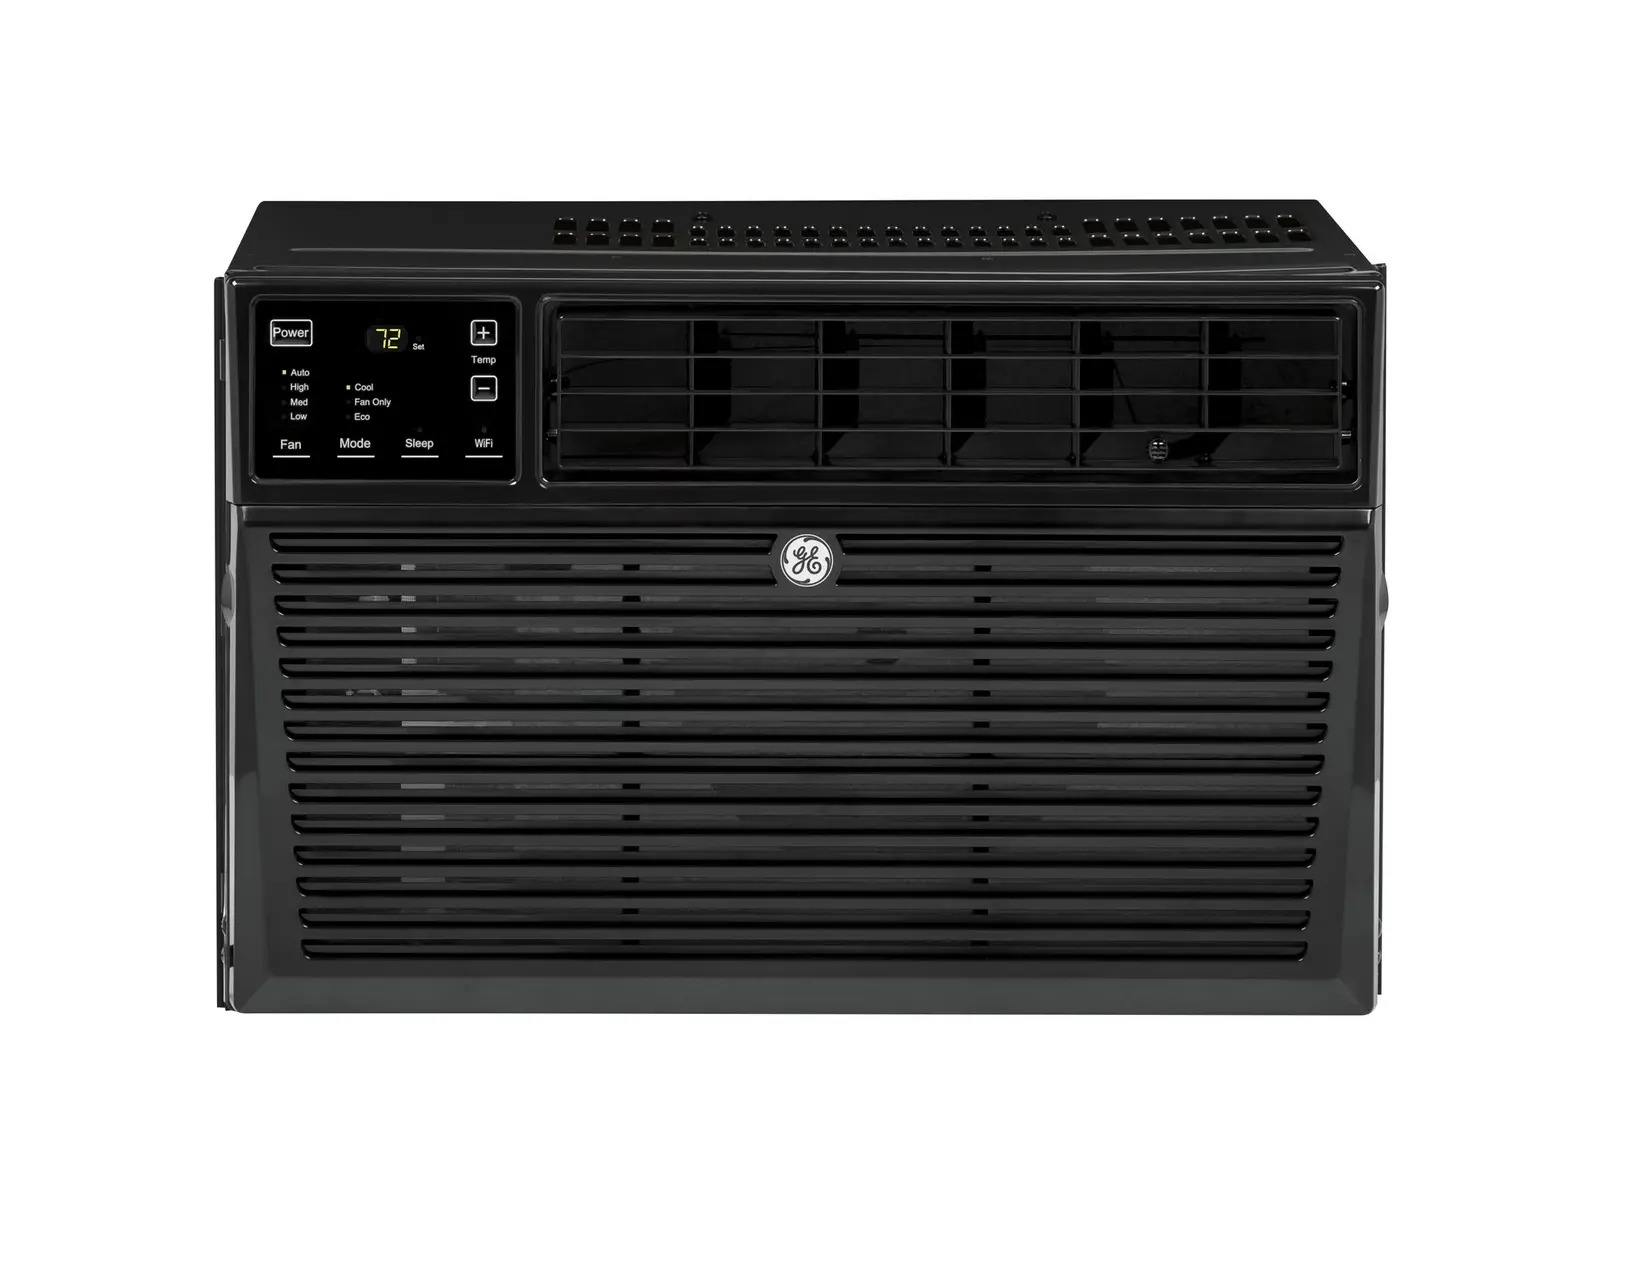 How To Fix The Error Code E9 For GE Air Conditioner